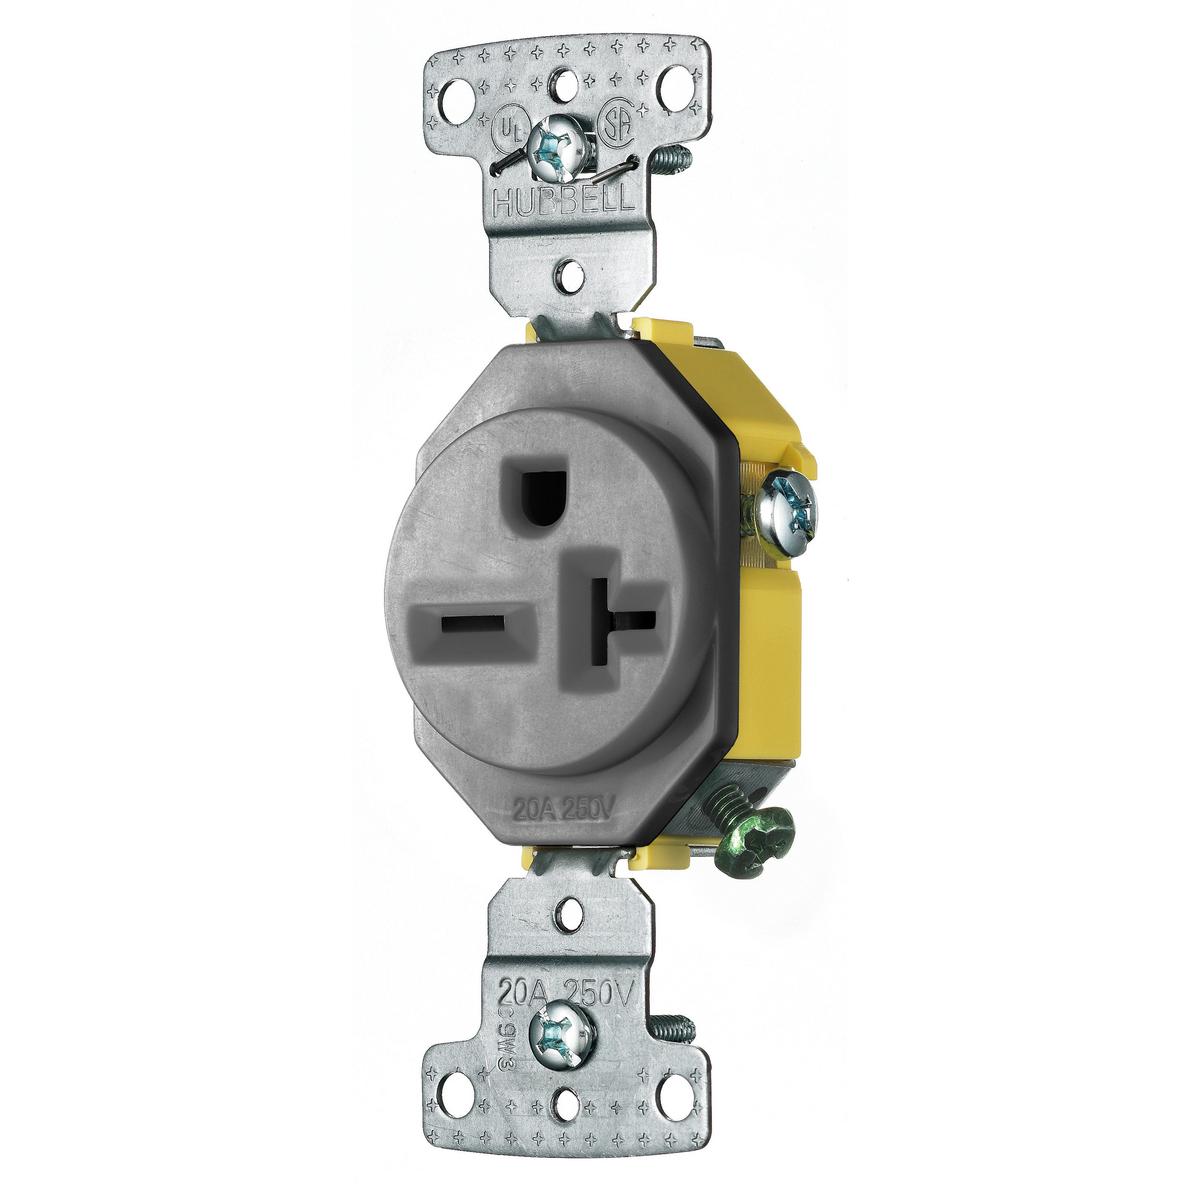 Hubbell RR205GY TradeSelect, Straight Blade, Single Receptacle, Self Grounding, 20A 250V, 2-Pole 3-Wire Grounding, 6-20R, Gray  ; Smooth indented face appearance ; Multiple-drive Slot/Phillips/Robertson head screws ; Tough thermoplastic ultrasonically welded cover and ba